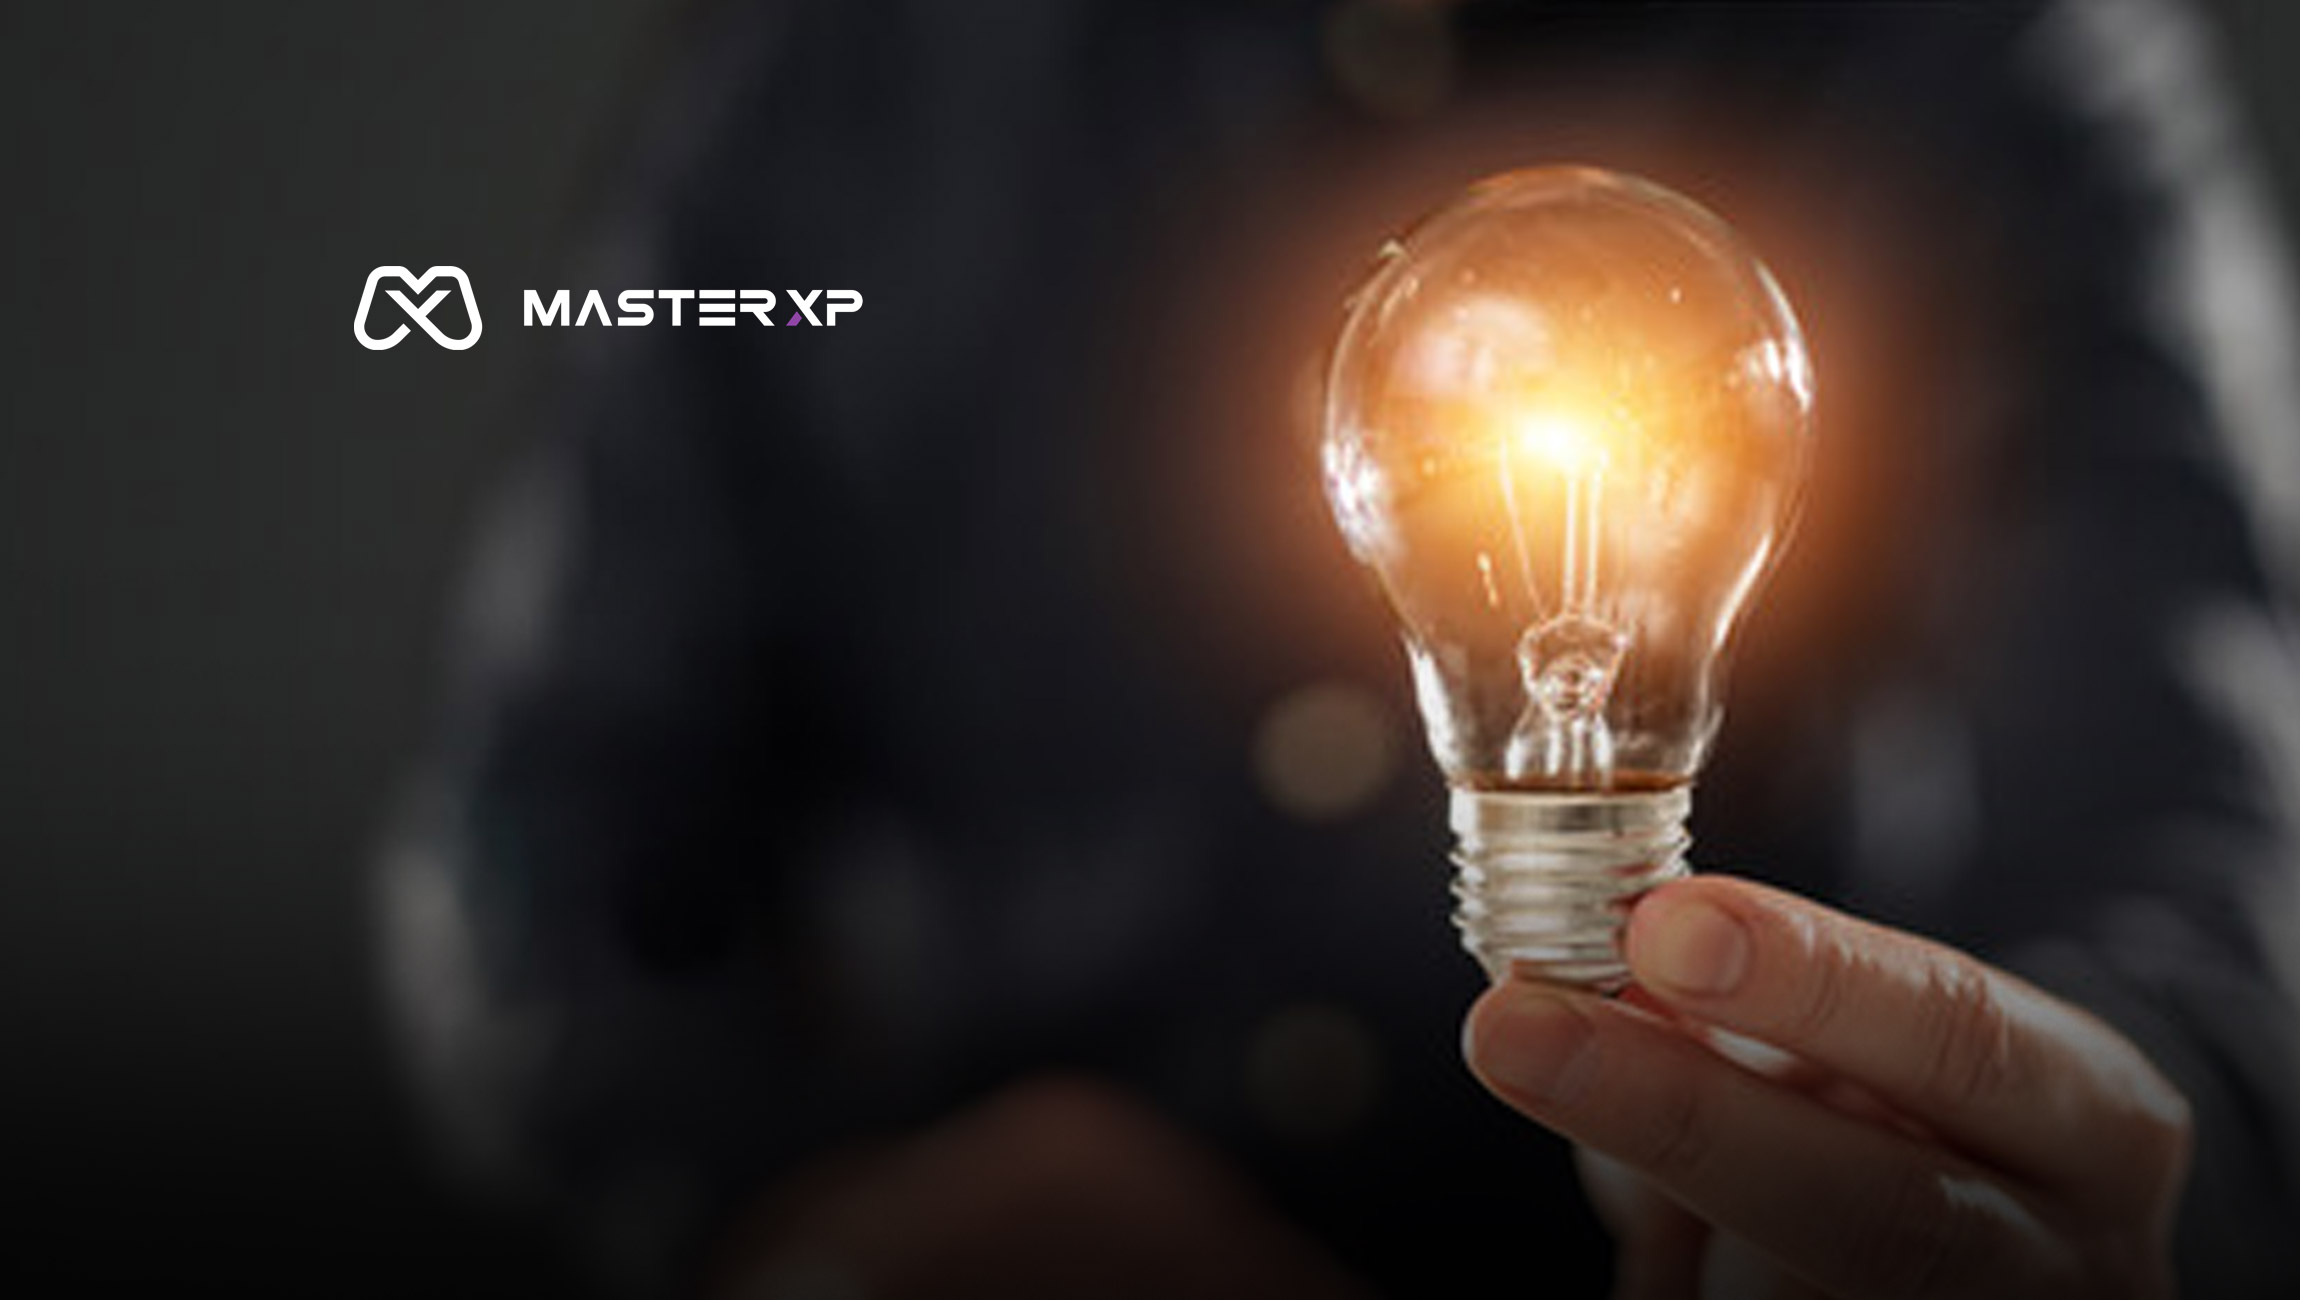 Master XP, A New Cooler Master Subsidiary Brand, Is Pleased To Announce The Launch Of Their New Website